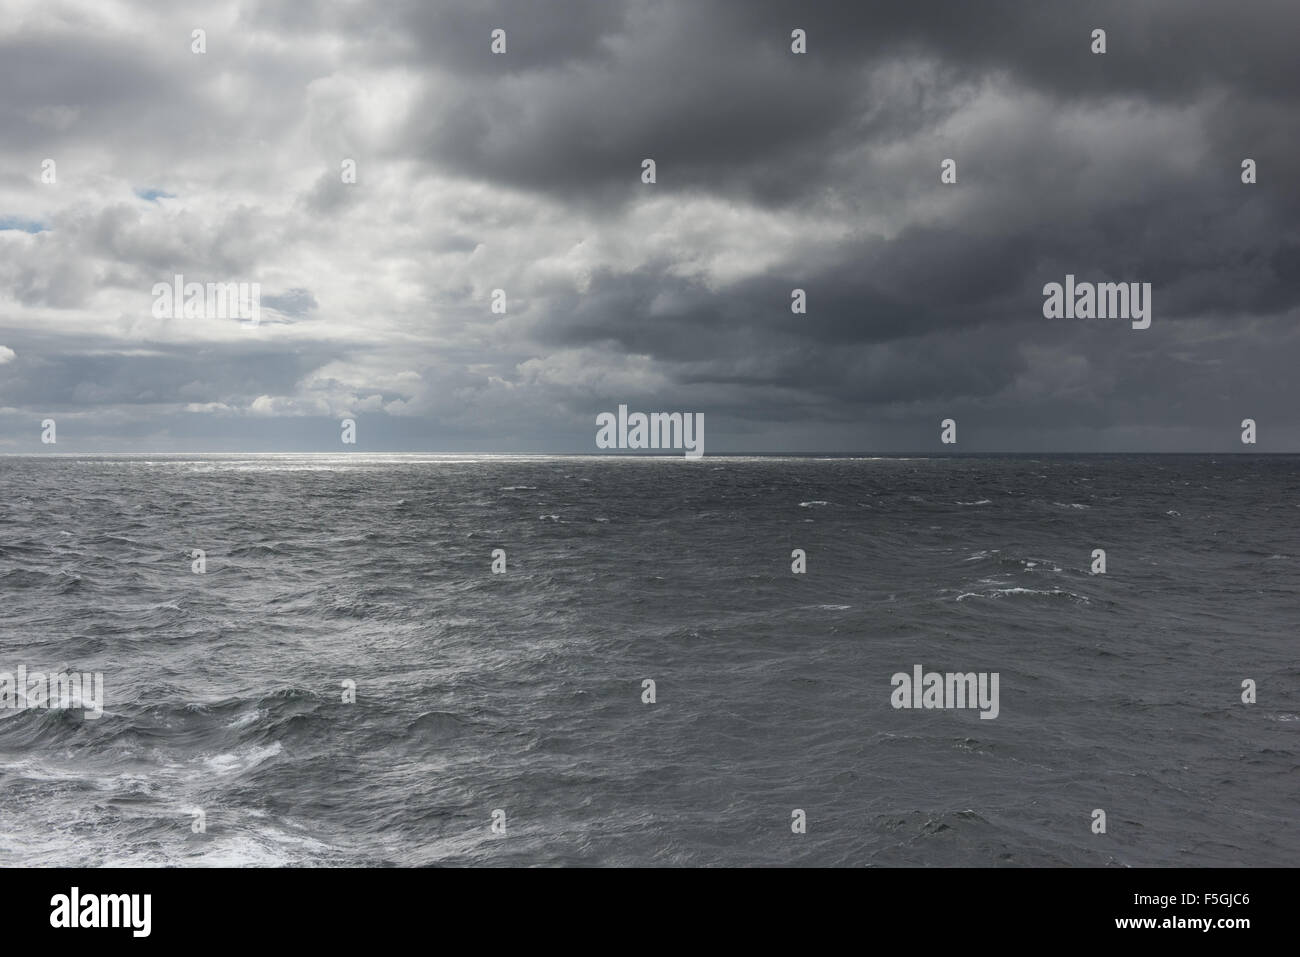 Lithuania, bad weather front over the Baltic Sea Stock Photo